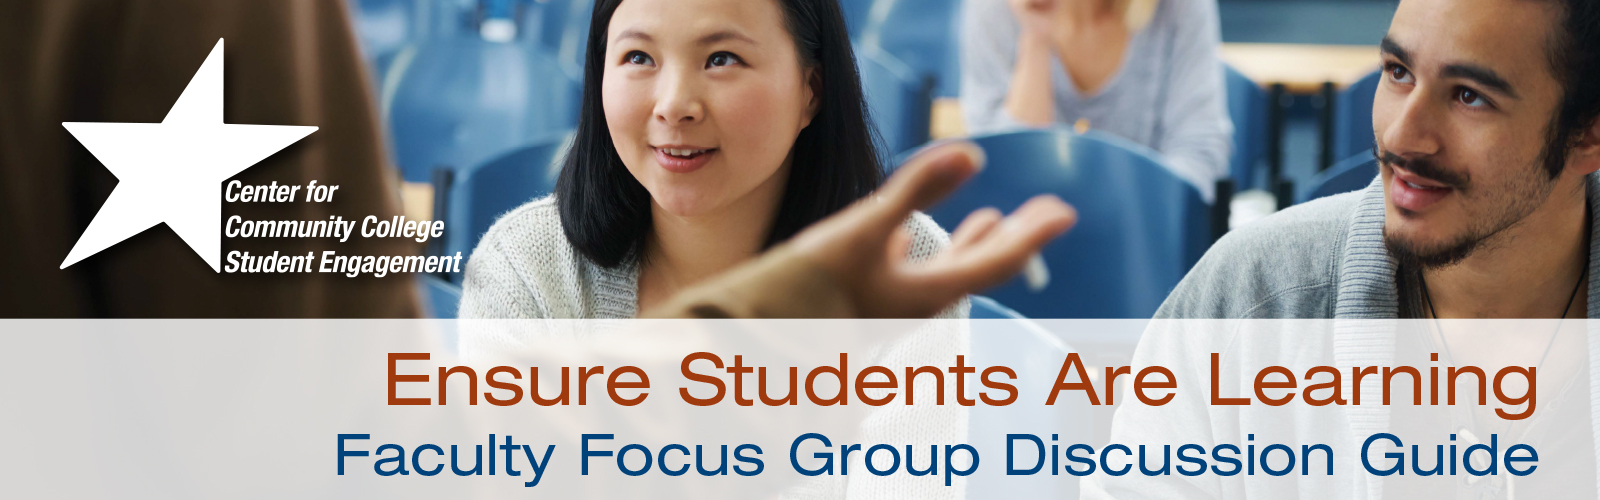 Graphical Banner for Faculty Focus Group